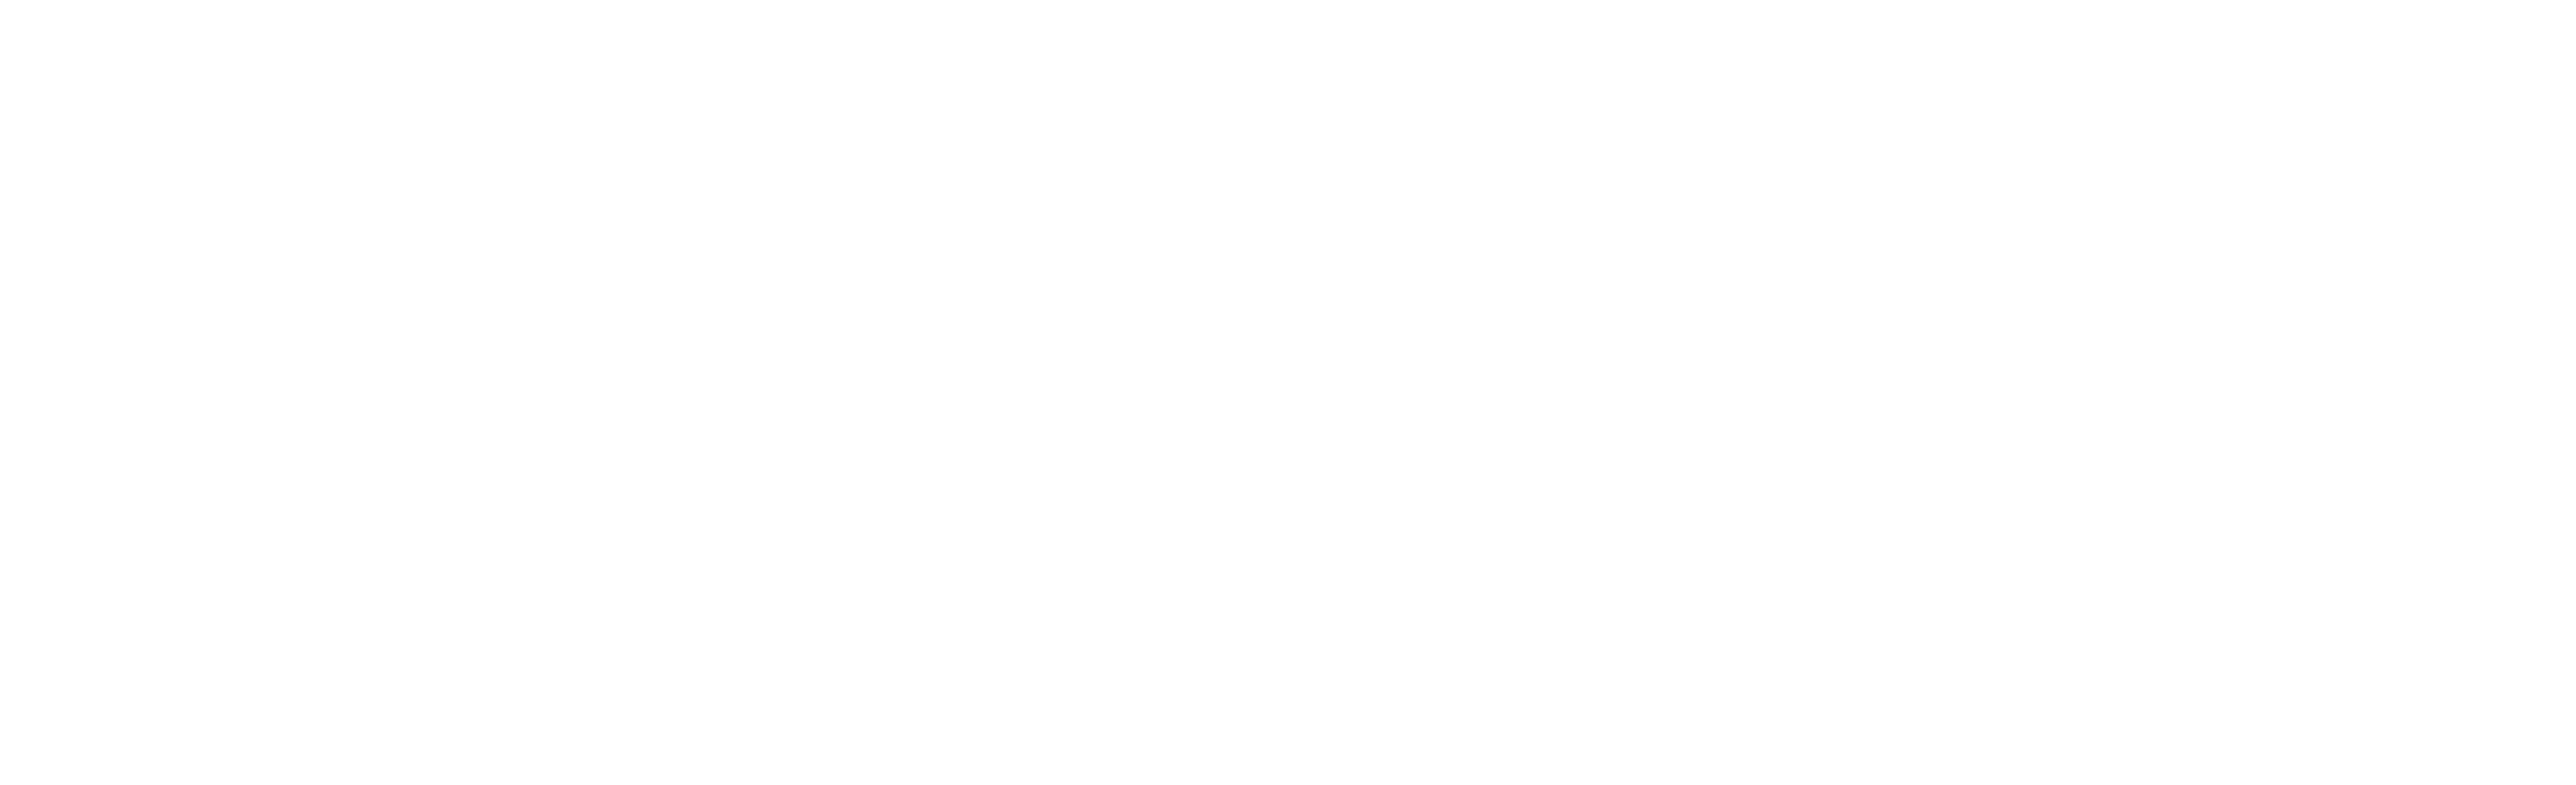 The Beltline Impact - How a Georgia Tech student changed Atlanta forever